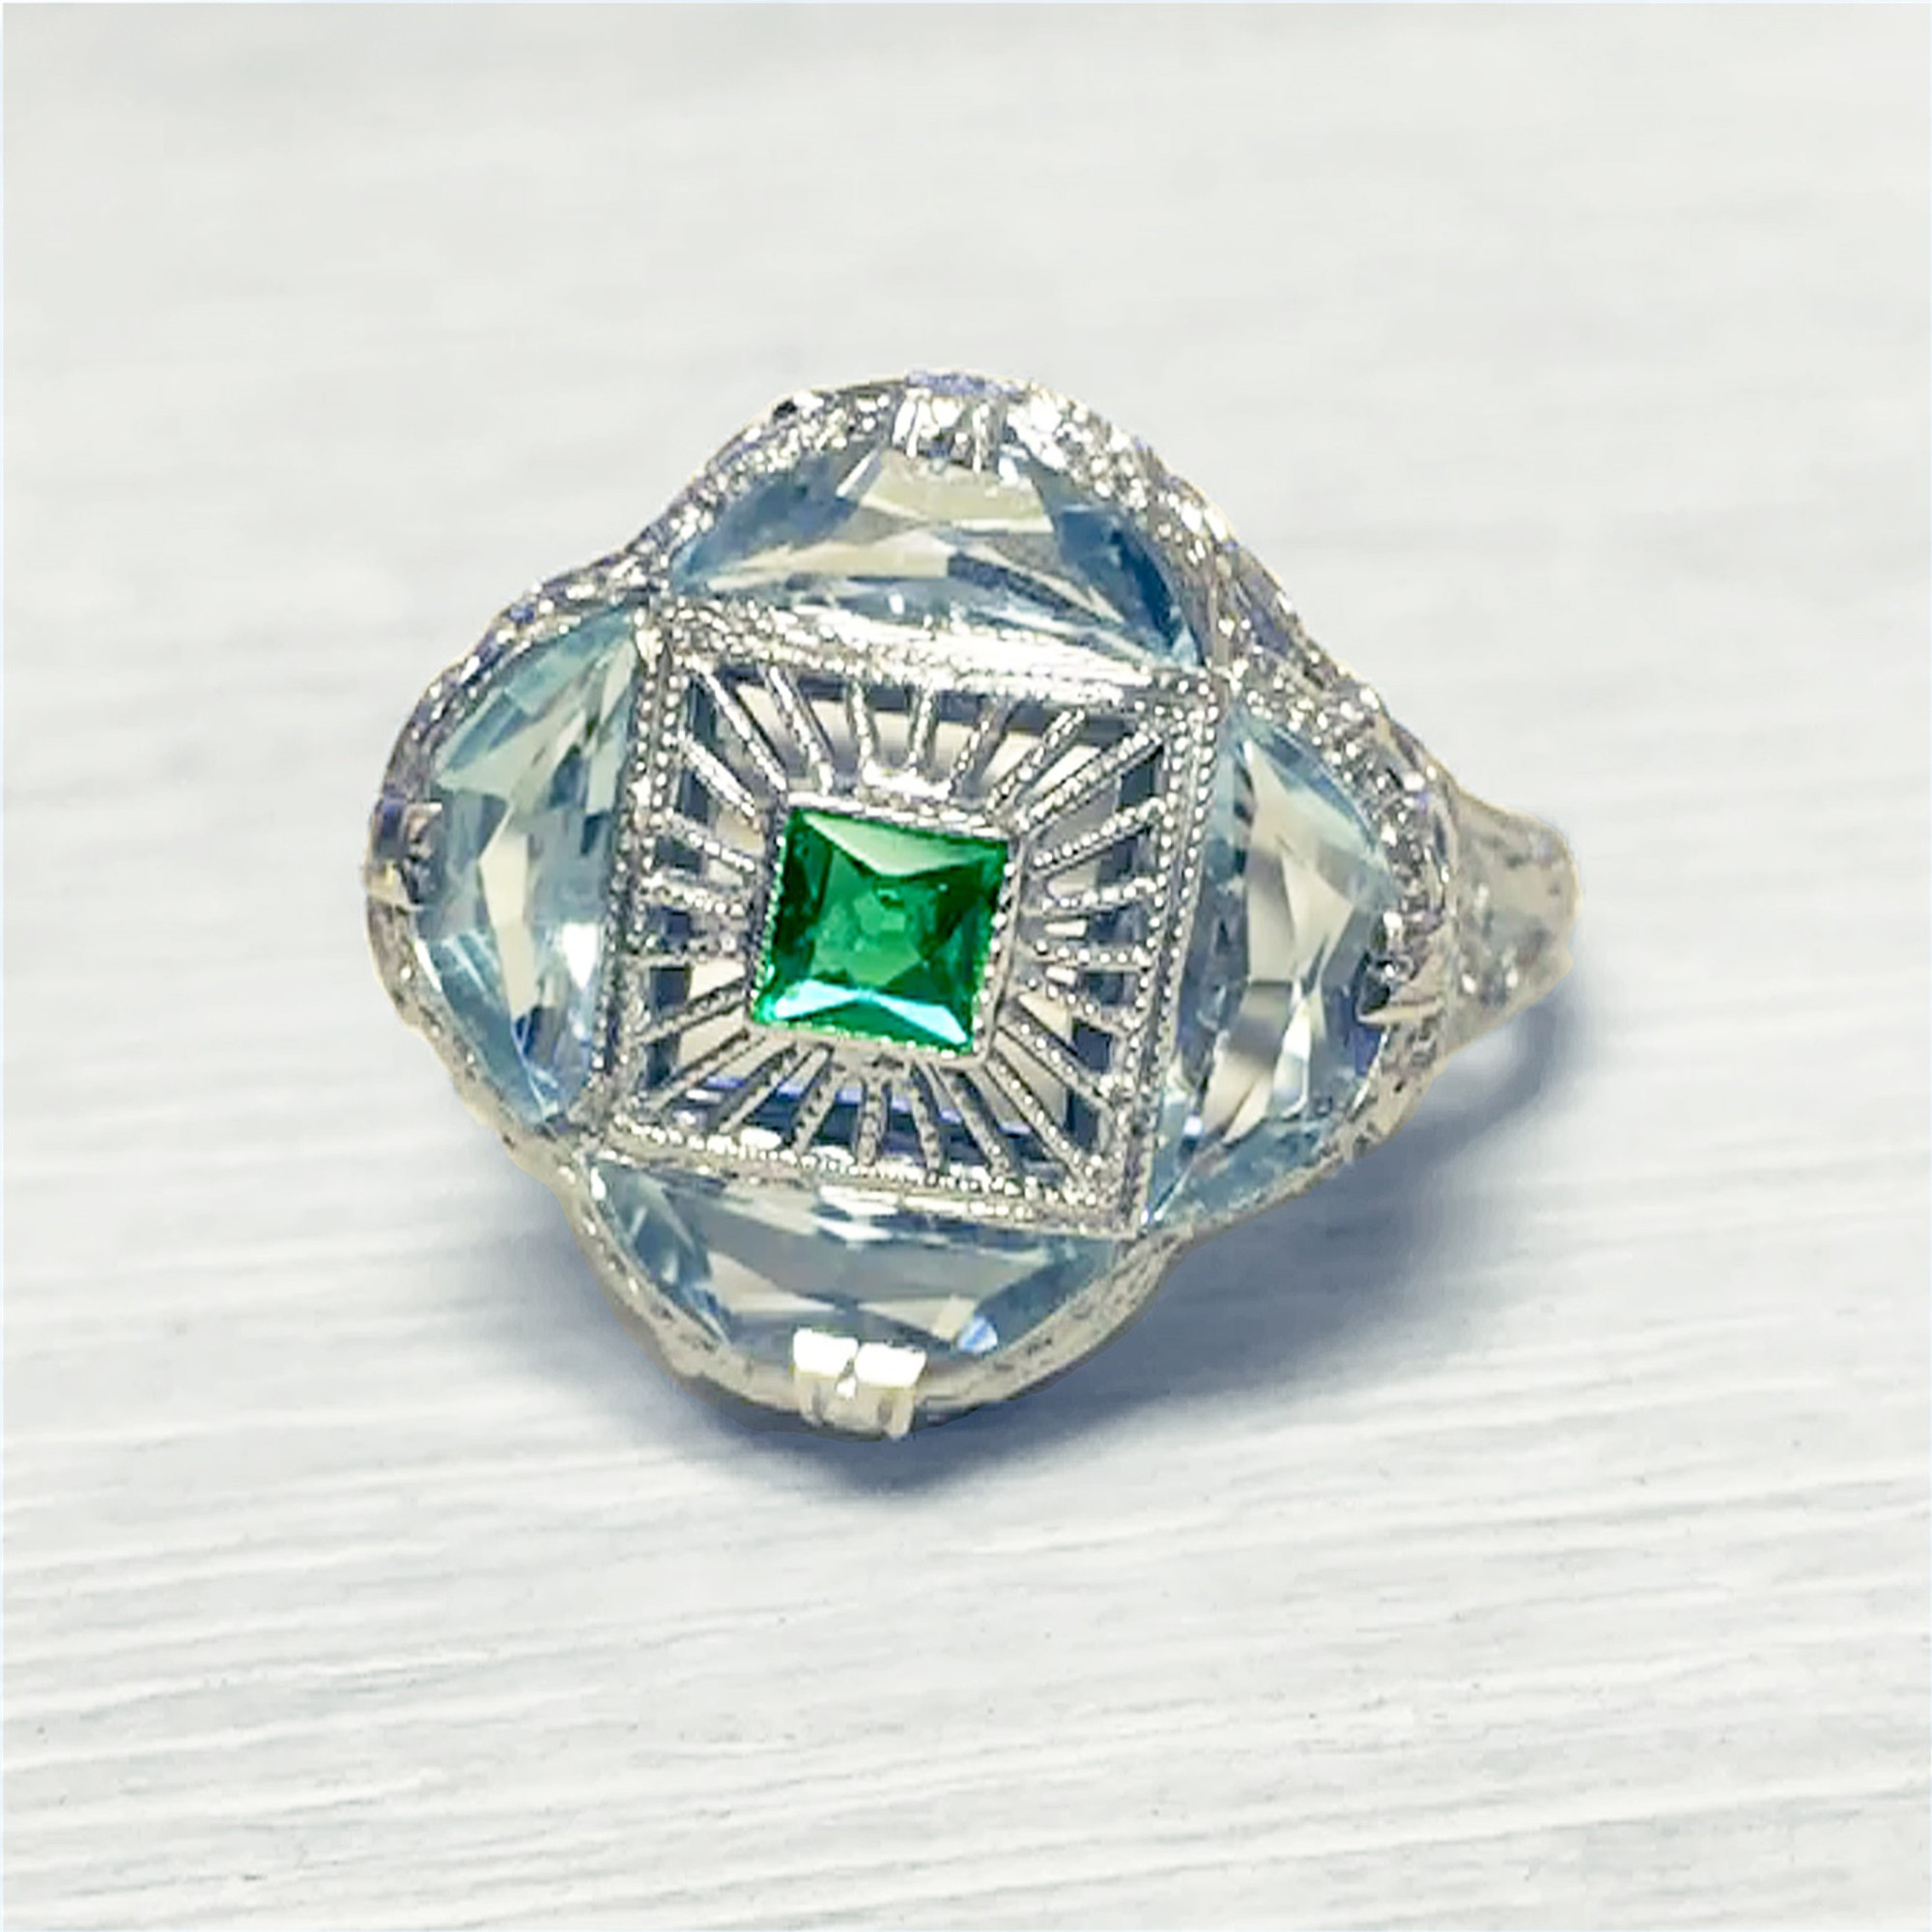 Ladies 14K White Gold Lace Filigree Blue Topaz and Emerald Ring